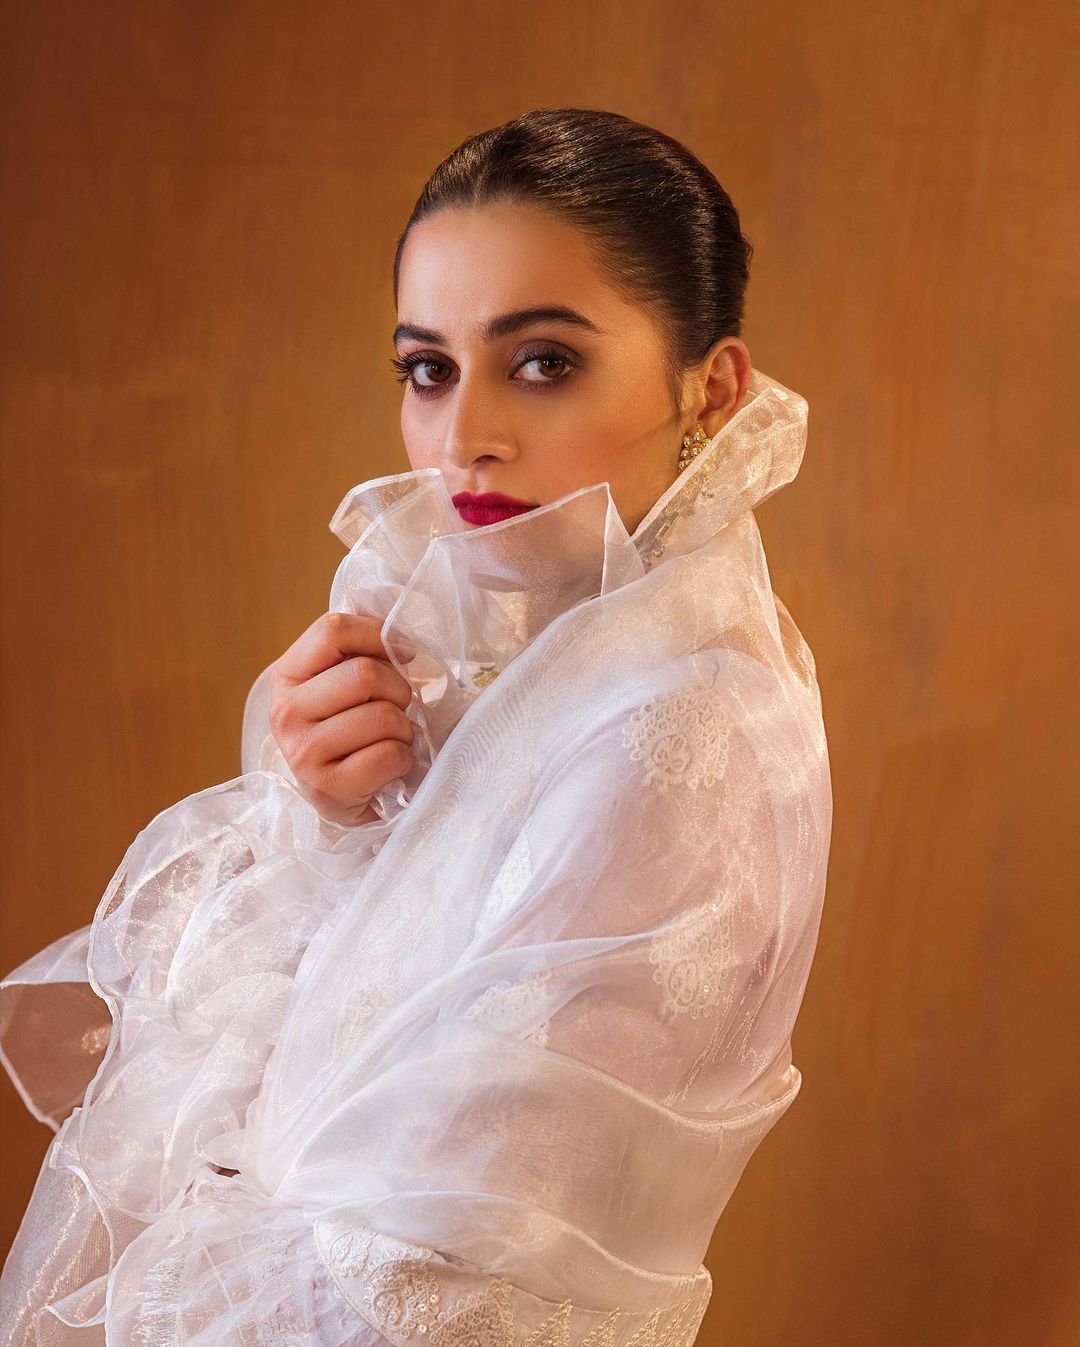 Aiman Khan channels her Glamour in White Attire